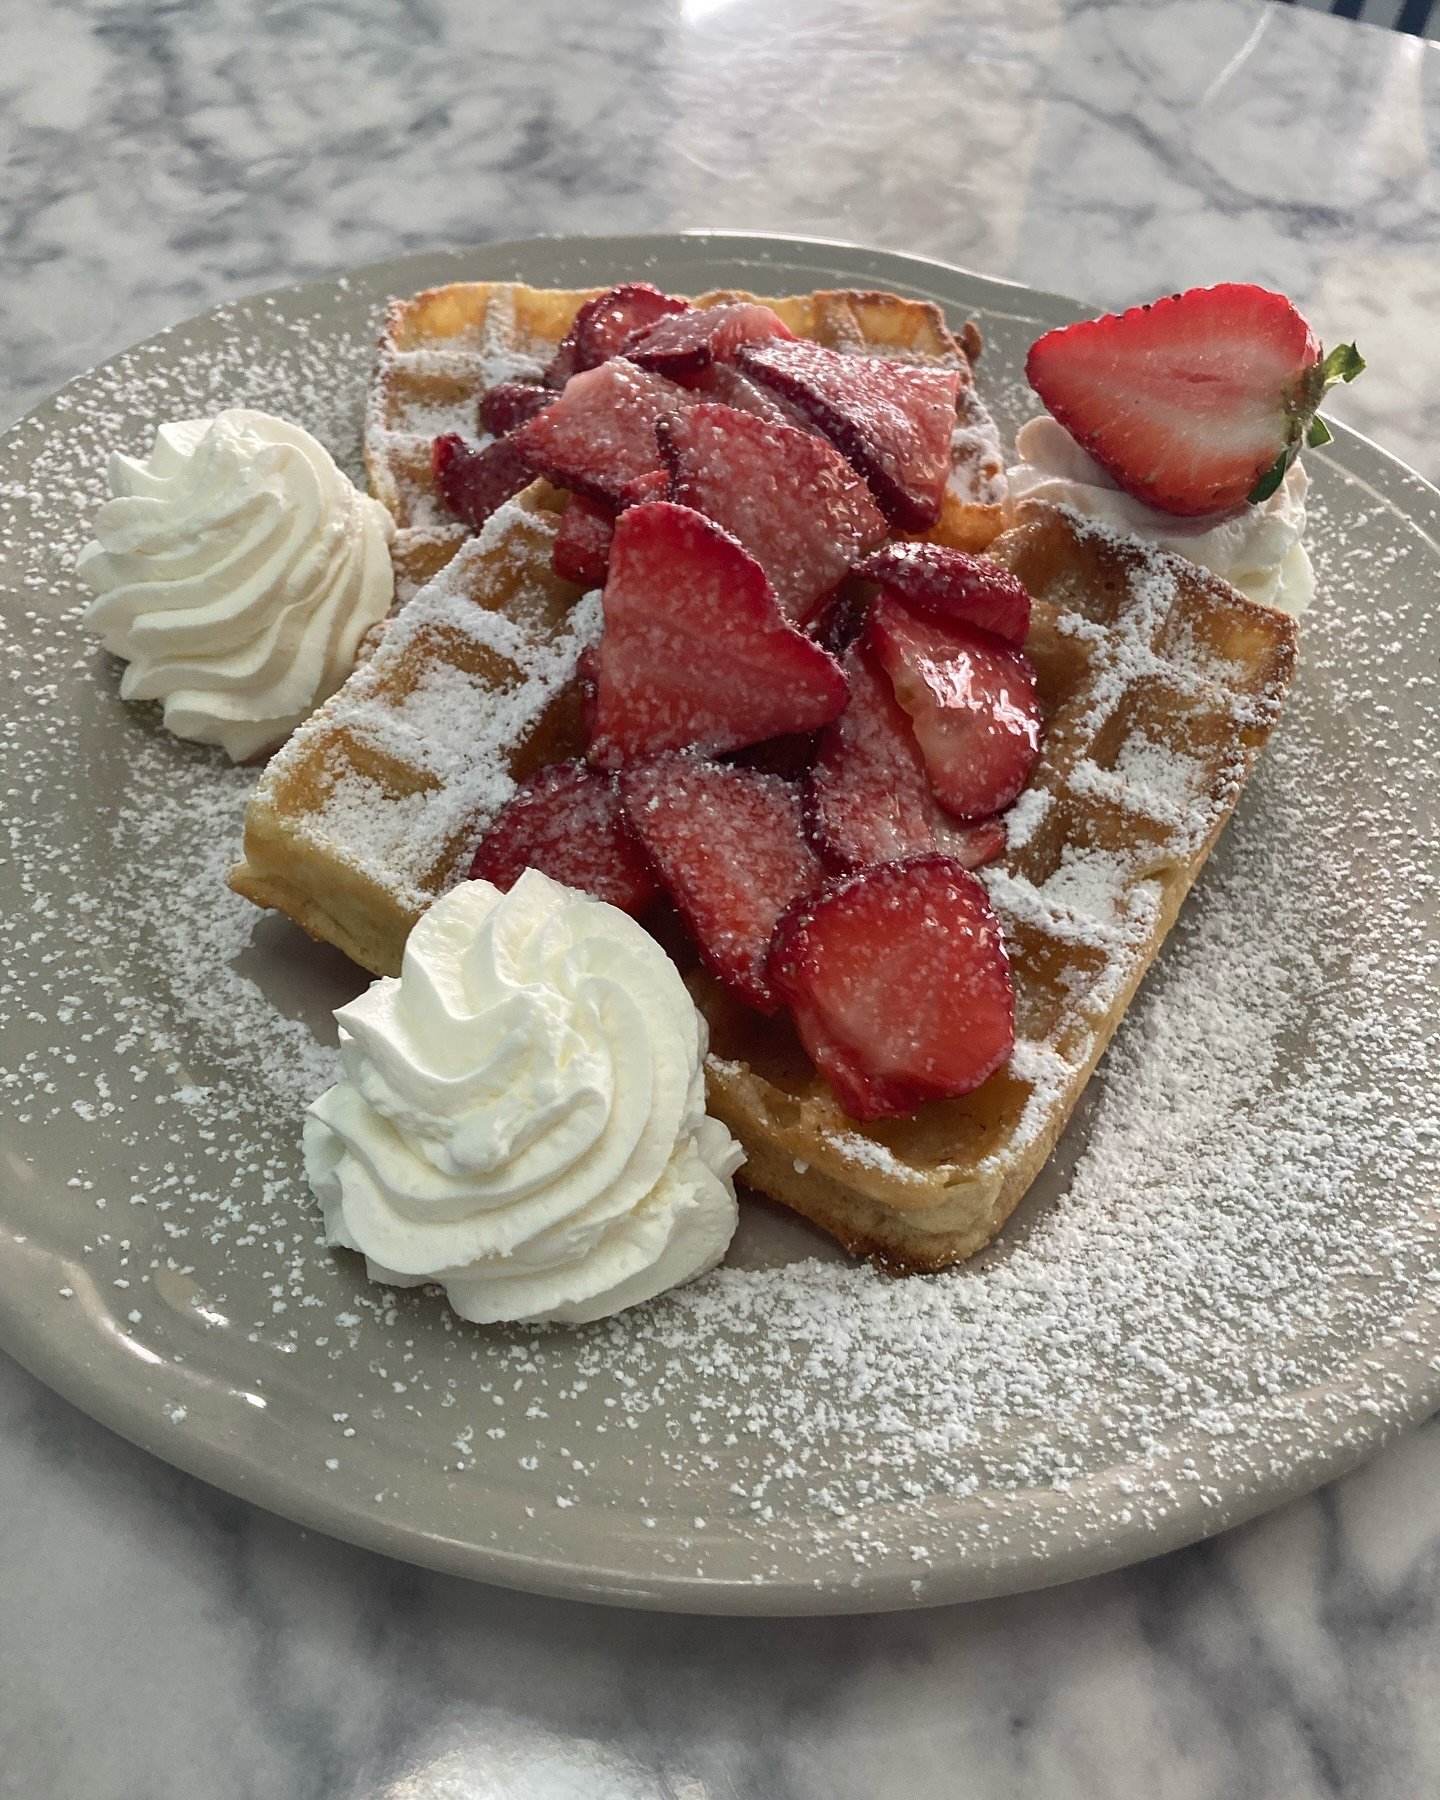 🍓 Today is a perfect day to try our new strawberries &amp; cream waffles! 🧇 Open today until 2pm. 

#bakery #patisserie #waffles #waffle #strawberriesandcream #strawberriesandcreamwaffles #orchardpark #orchardparkny #buffalo #buffalony